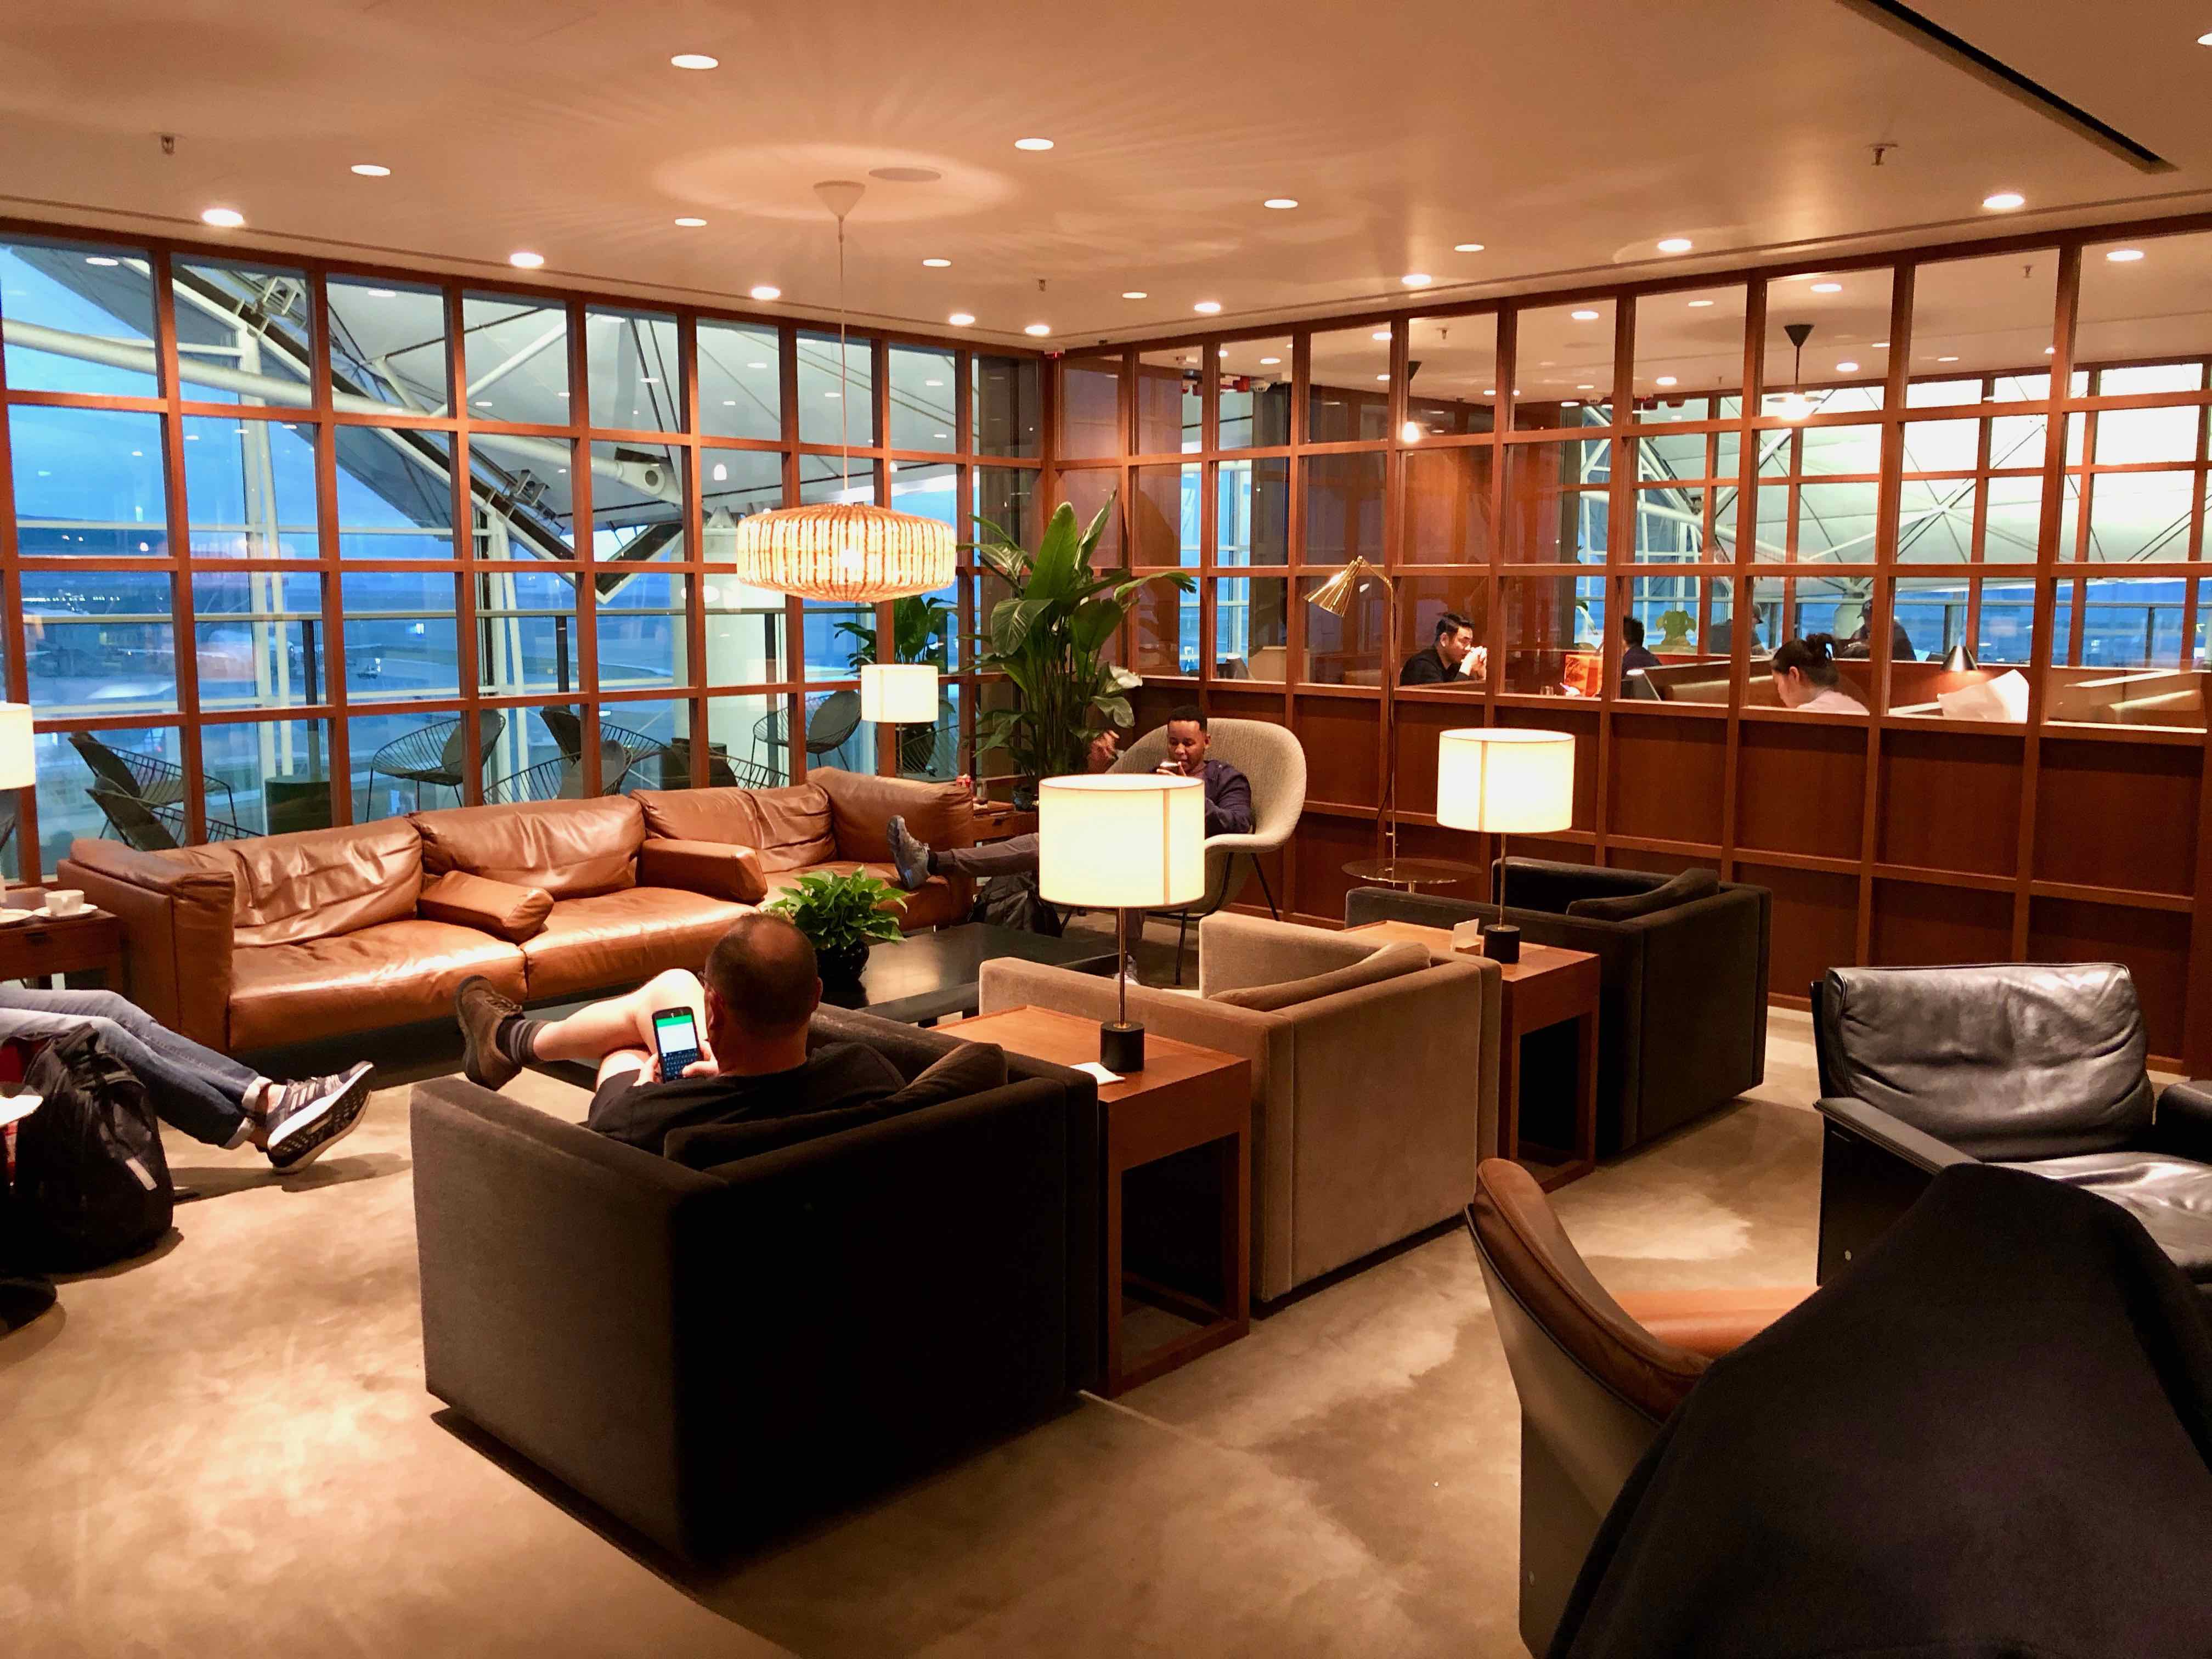 Cathay Pacific The Deck Business Class Lounge Hong Kong main lounging area